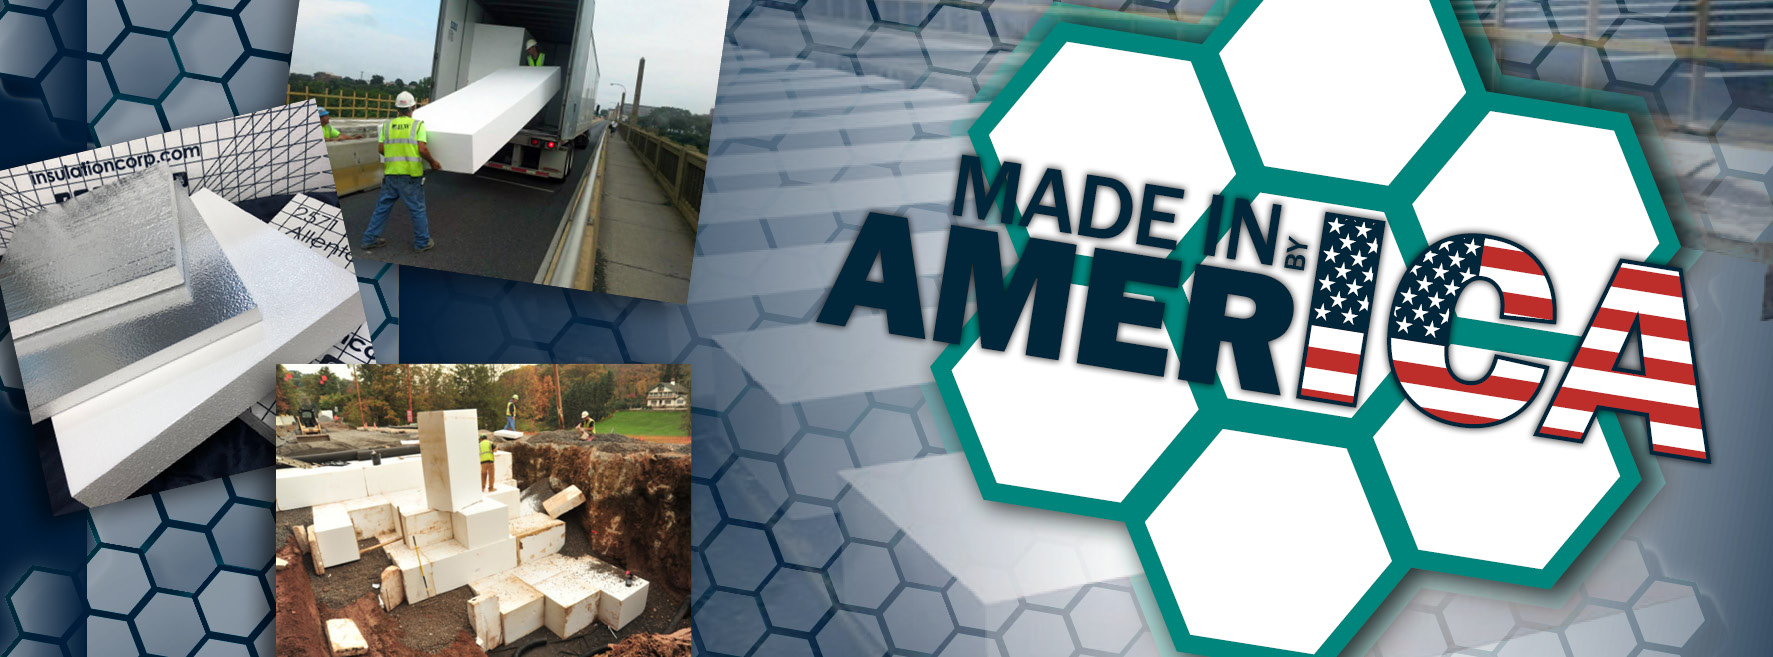 Made in America by ICA - expanded polystyrene products